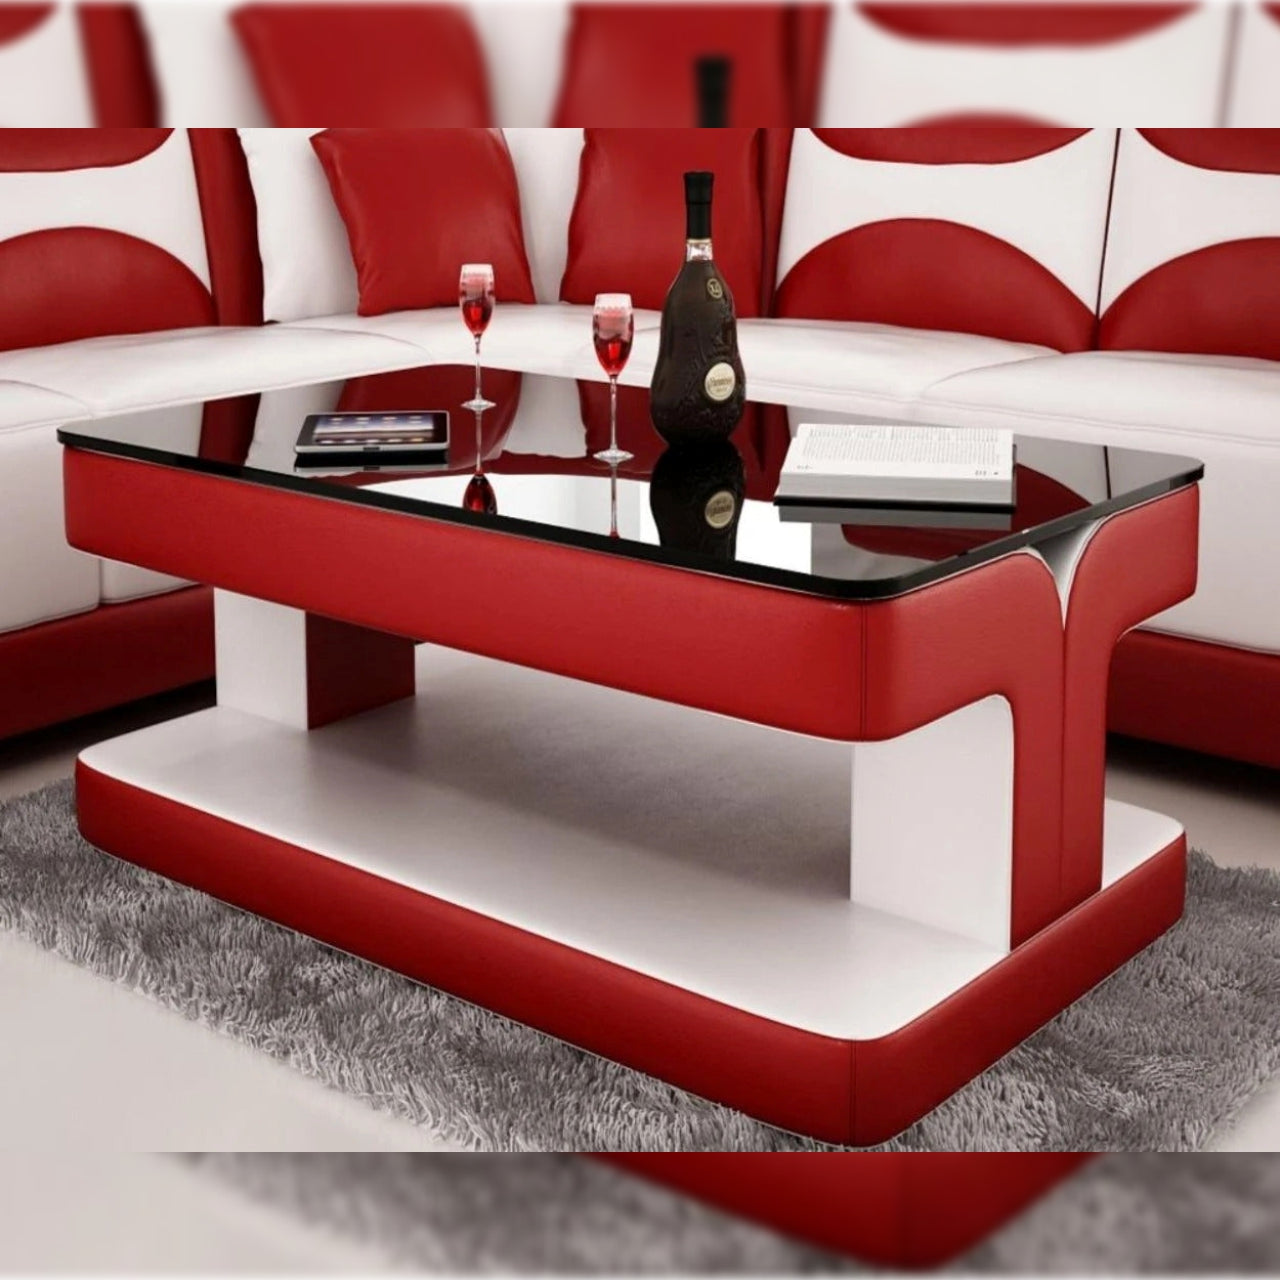 Leatherette Coffee Table Red Leatherette Coffee Table wBlack Glass Table